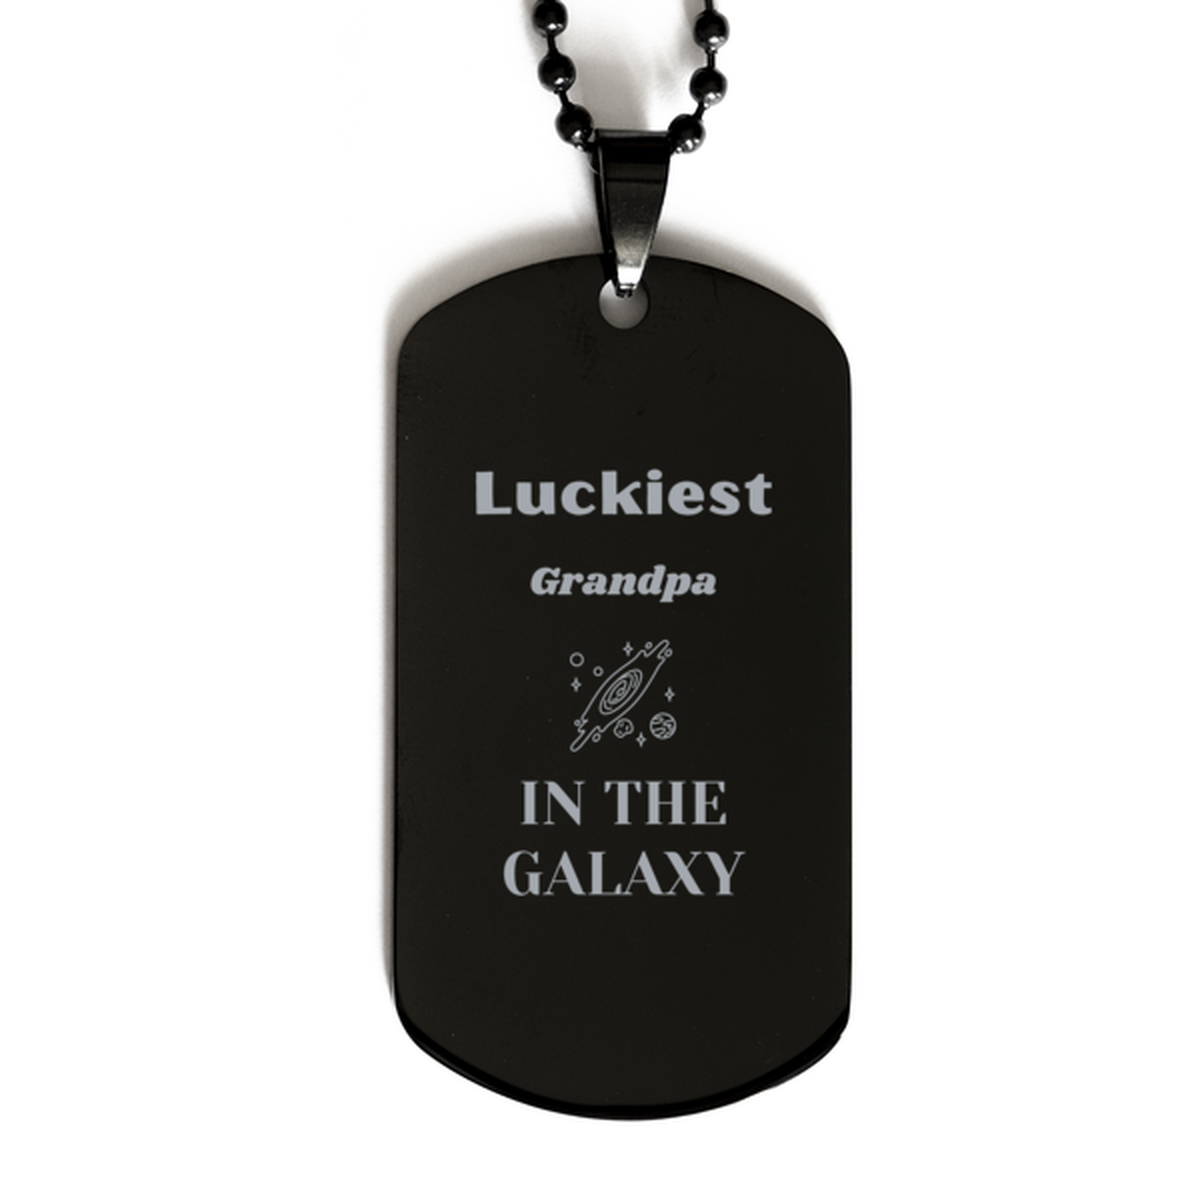 Luckiest Grandpa in the Galaxy, To My Grandpa Engraved Gifts, Christmas Grandpa Black Dog Tag Gifts, X-mas Birthday Unique Gifts For Grandpa Men Women